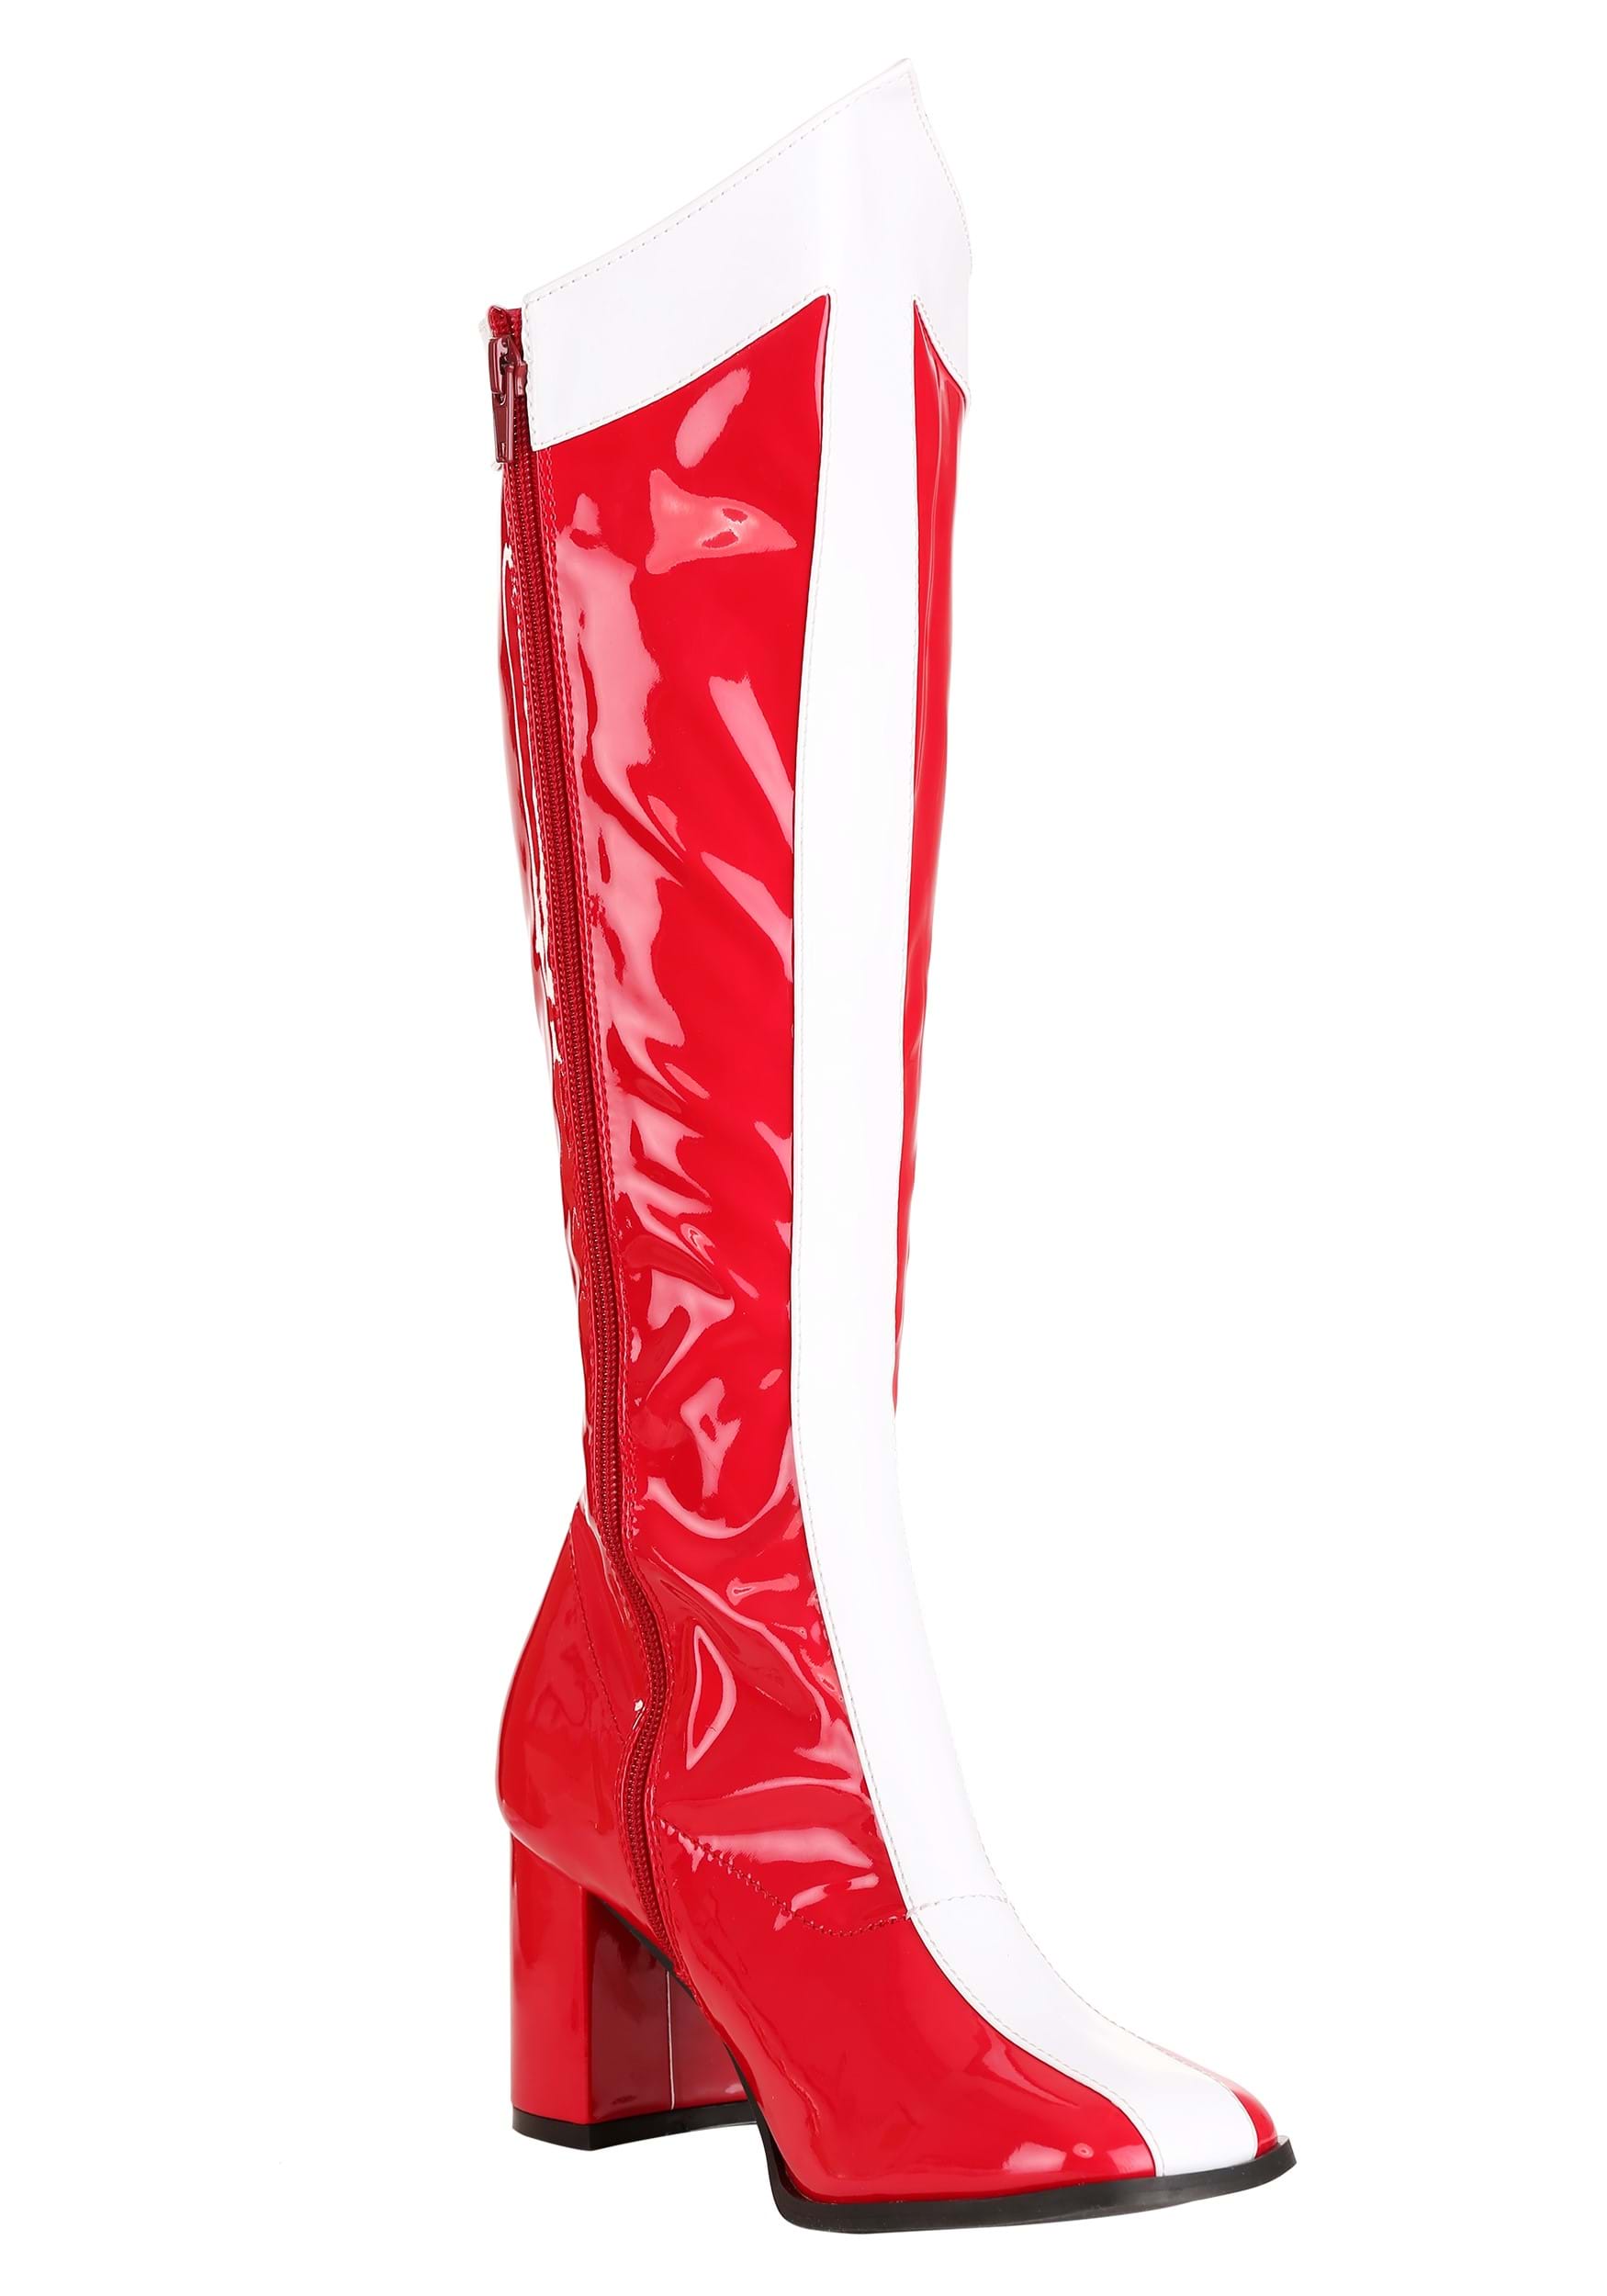 Wonderful Woman Costume Boots for Women